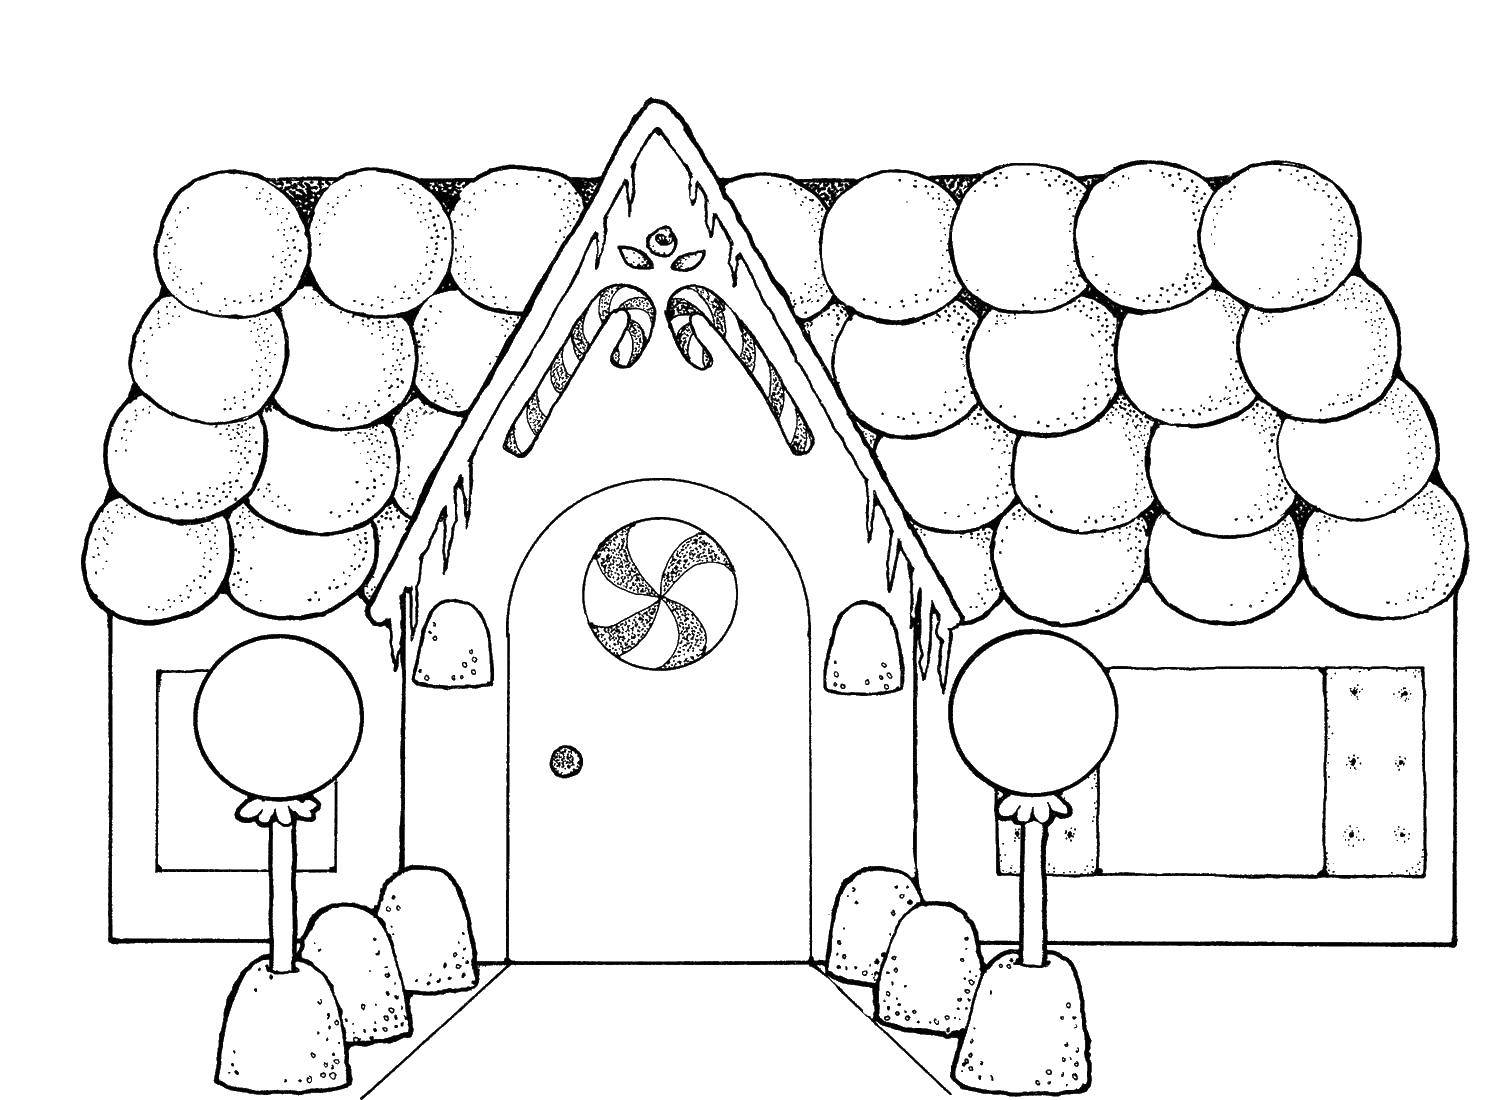 Coloring Sweet house. Category Coloring house. Tags:  house, sweets, candy.